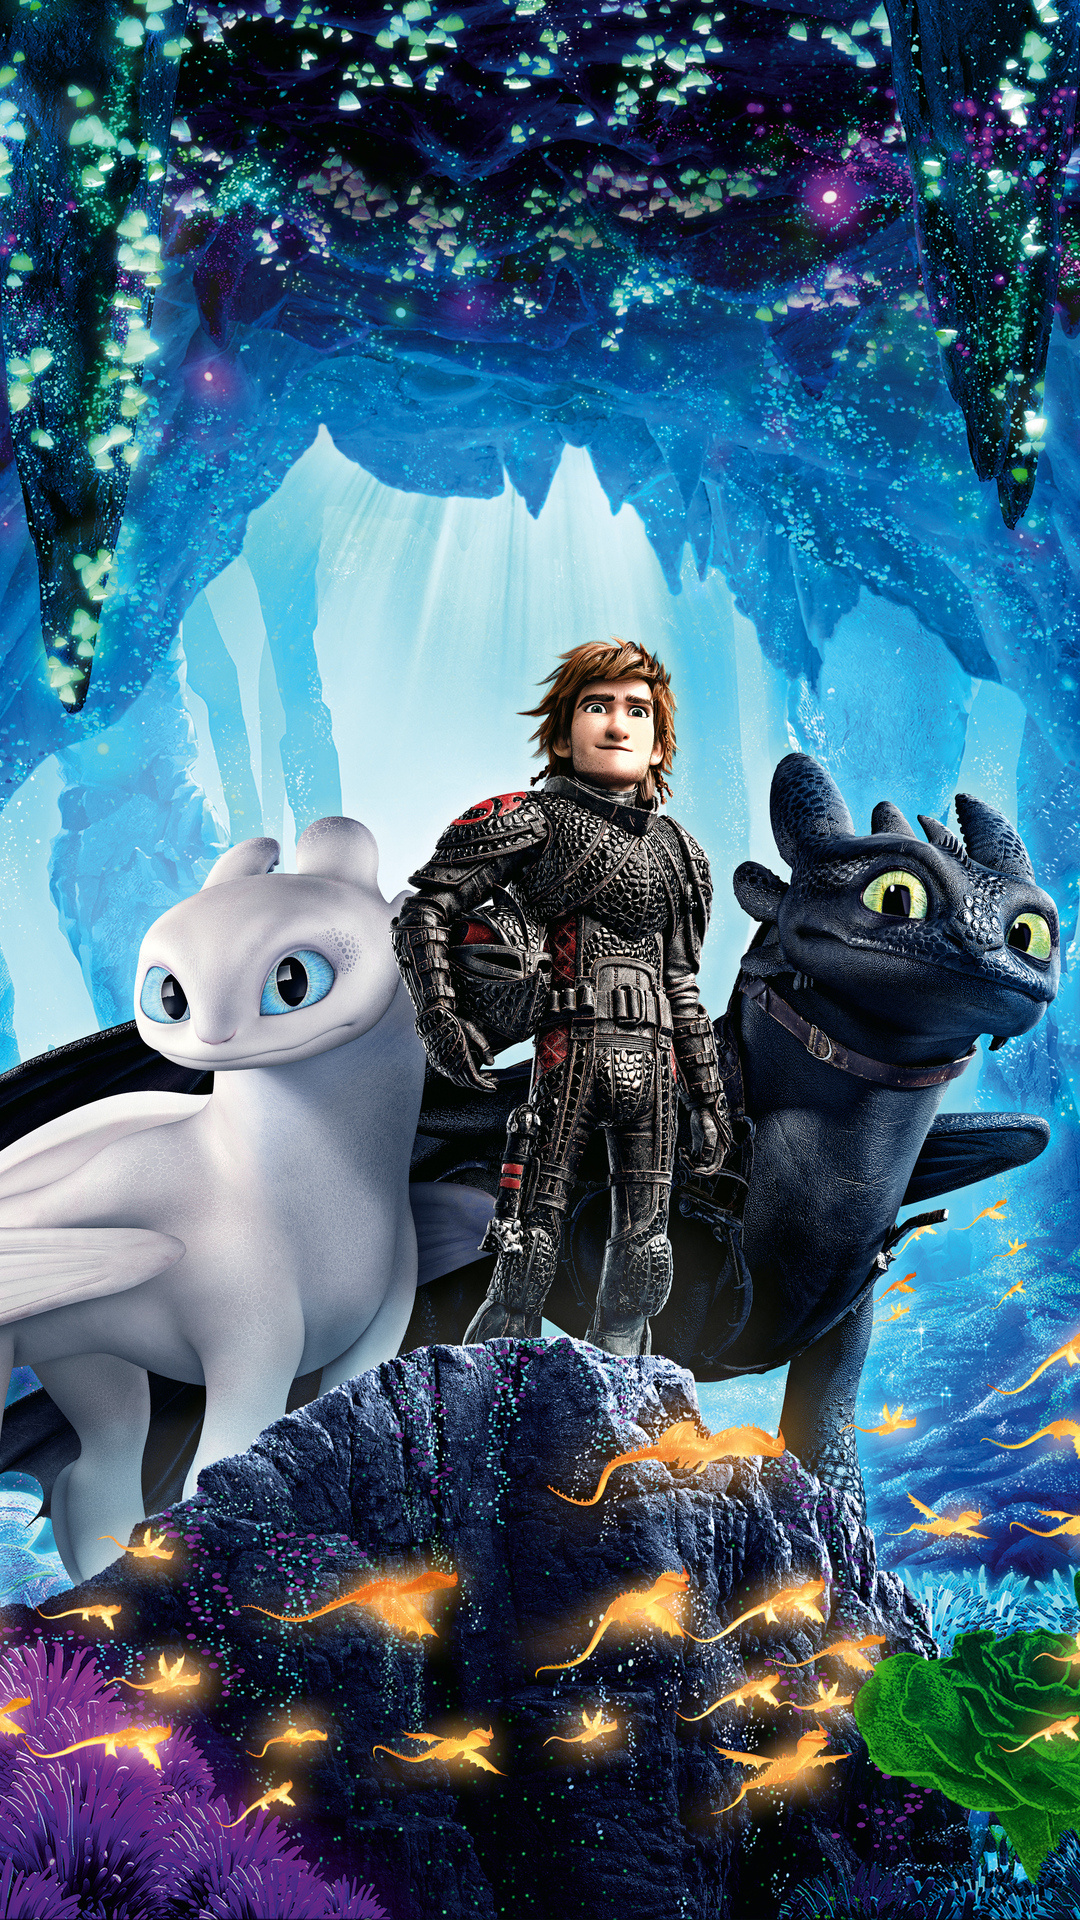 How to Train Your Dragon: The Hidden World (Animation), Unforgettable dragon adventure, 5K wallpapers, Incredible visuals, 1080x1920 Full HD Handy